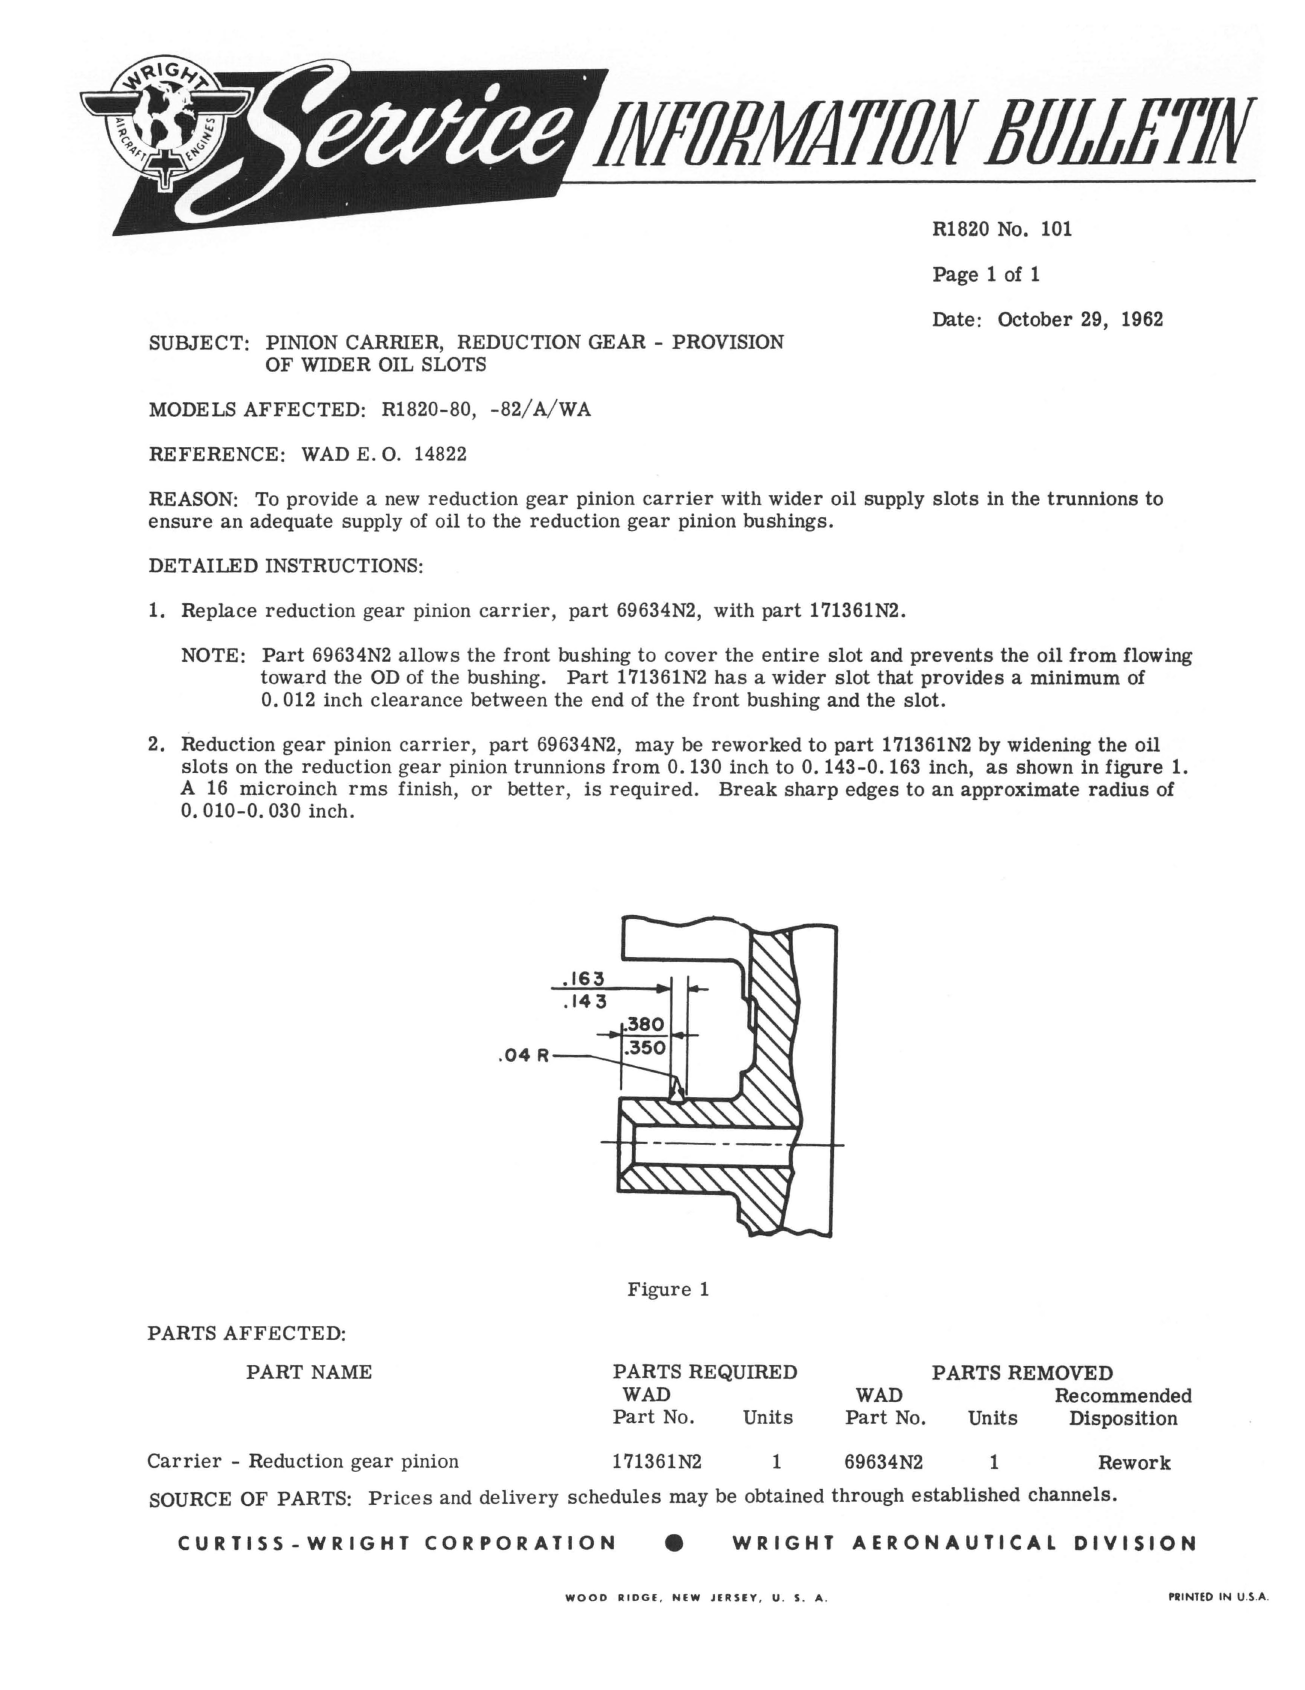 Sample page 1 from AirCorps Library document: Provision of Wider Oil Slots for Pinion Carrier, Reduction Gear